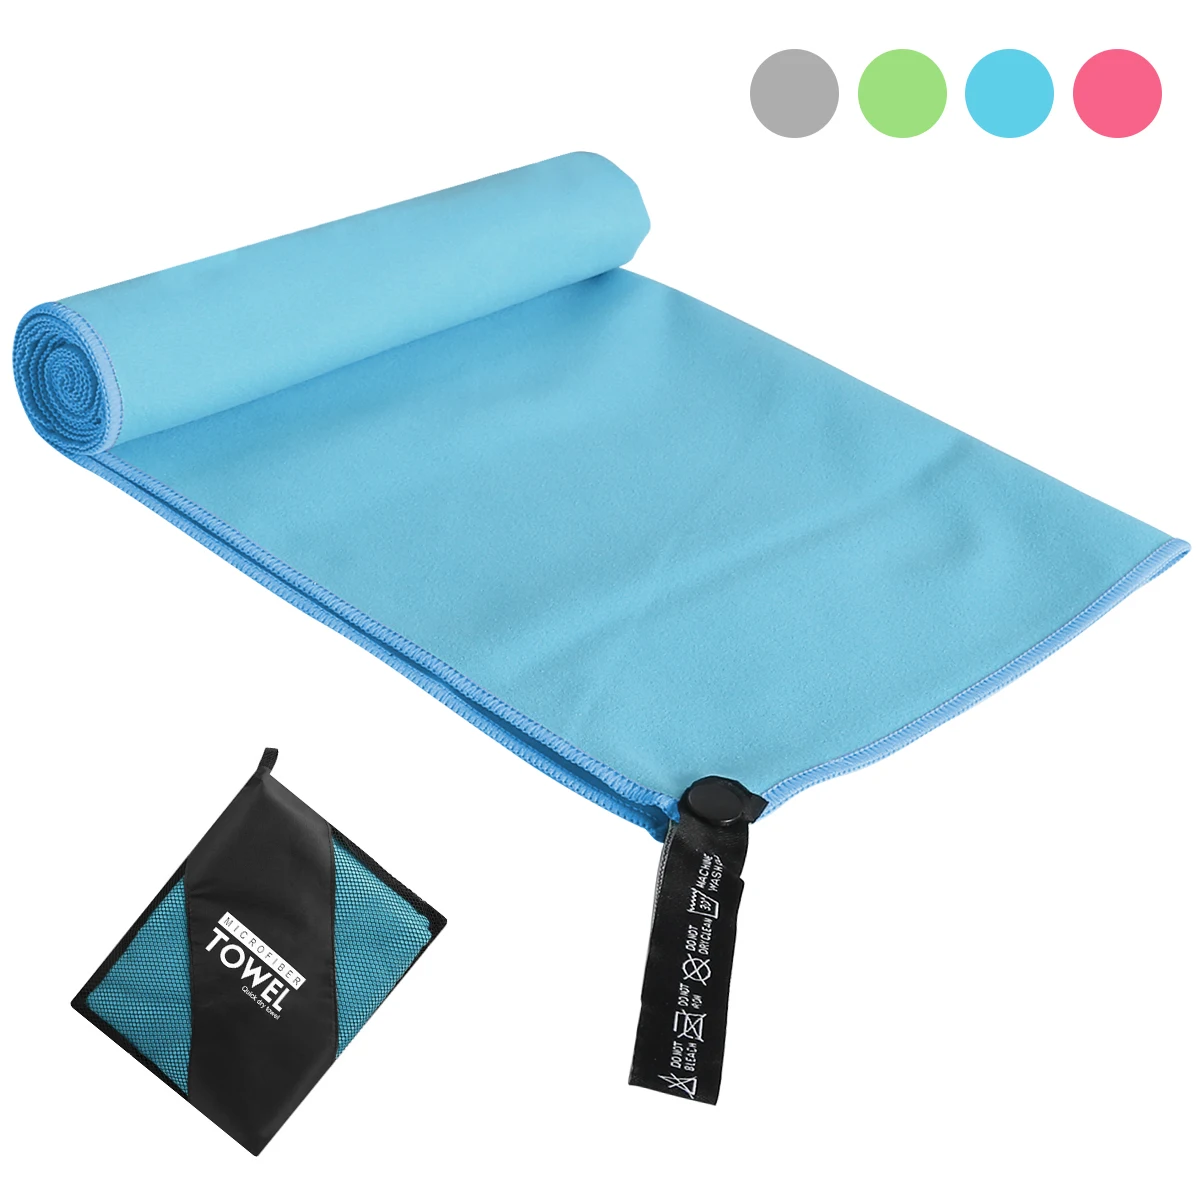 

152x76cm High Quality Microfiber Towel Quick Dry Absorbent Towel With Carry Bag For Outdoor Sports Travel Camping Fitness Beach